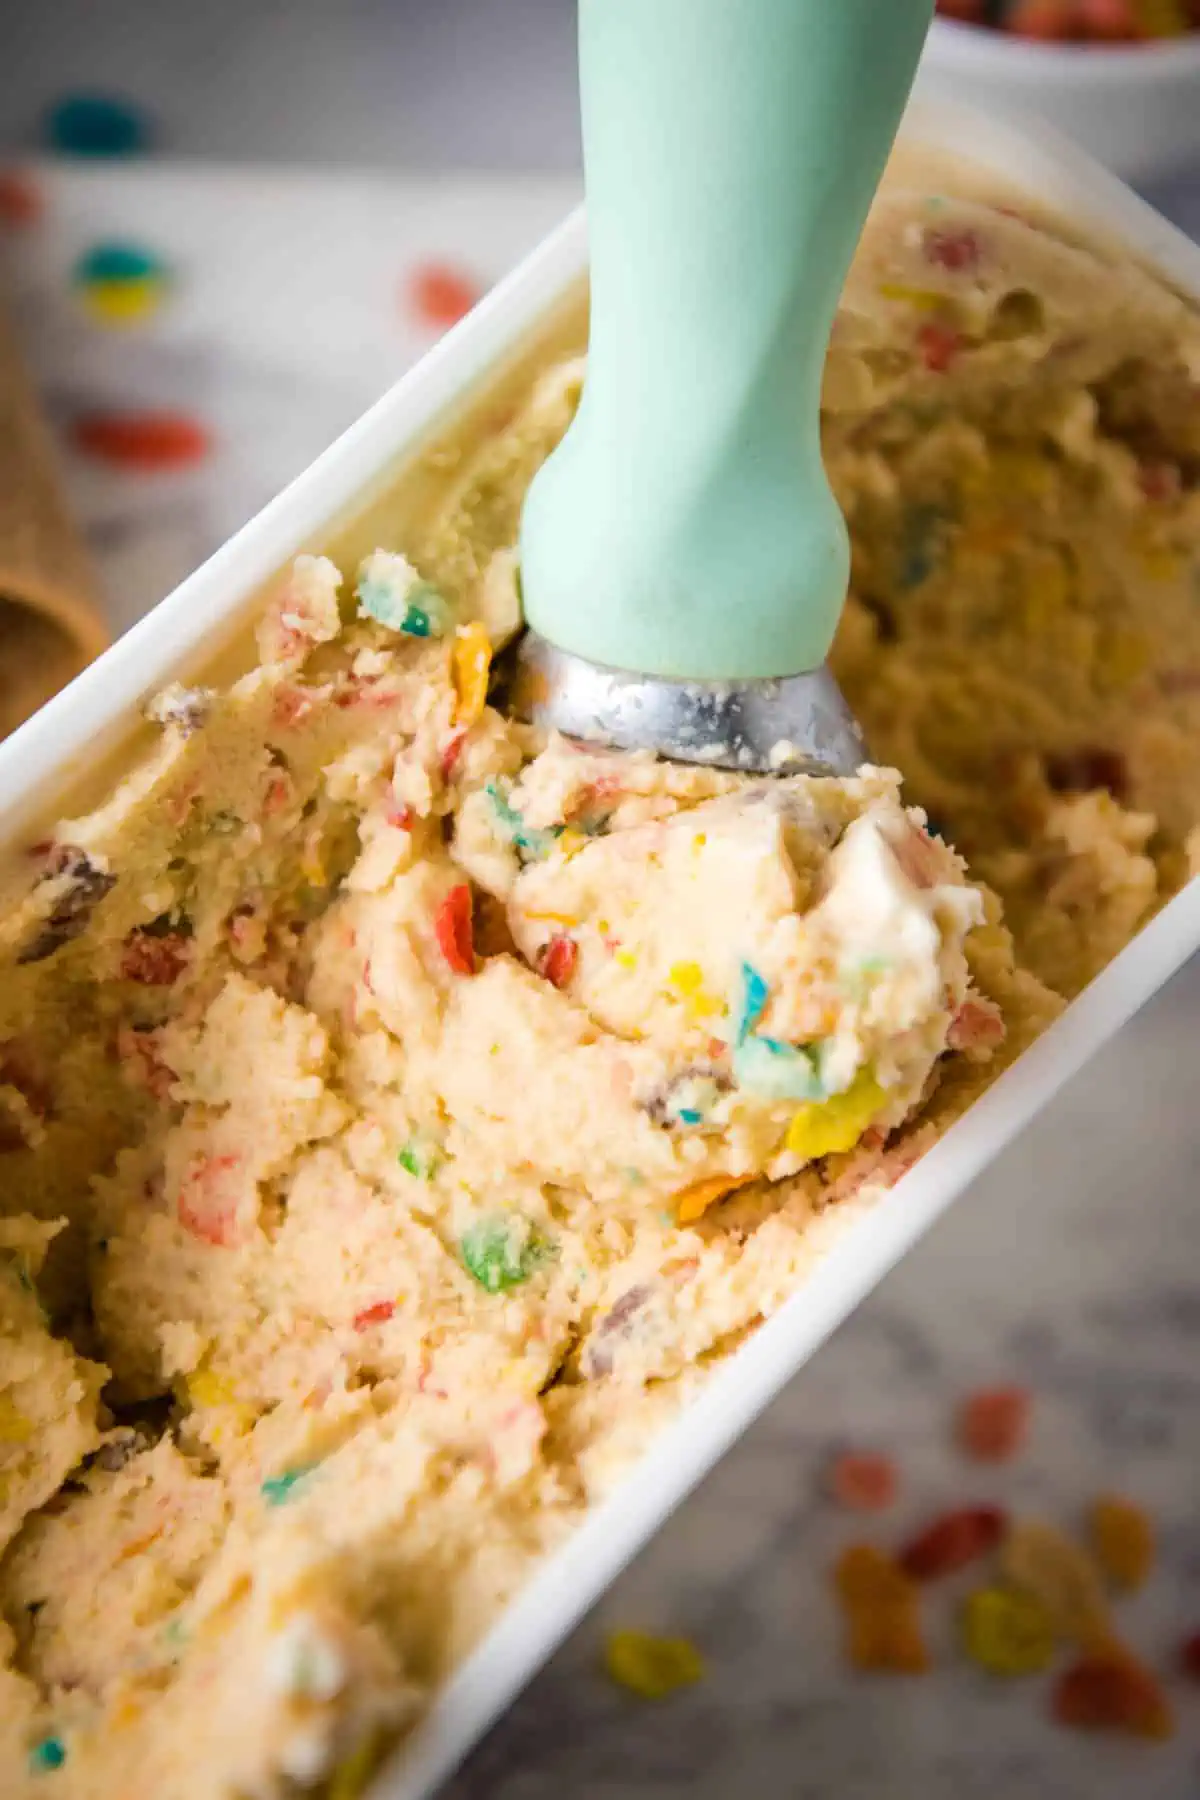 mint green ice cream scoop in white container of scoopable Fruity Pebbles cereal milk ice cream on white marble cutting board